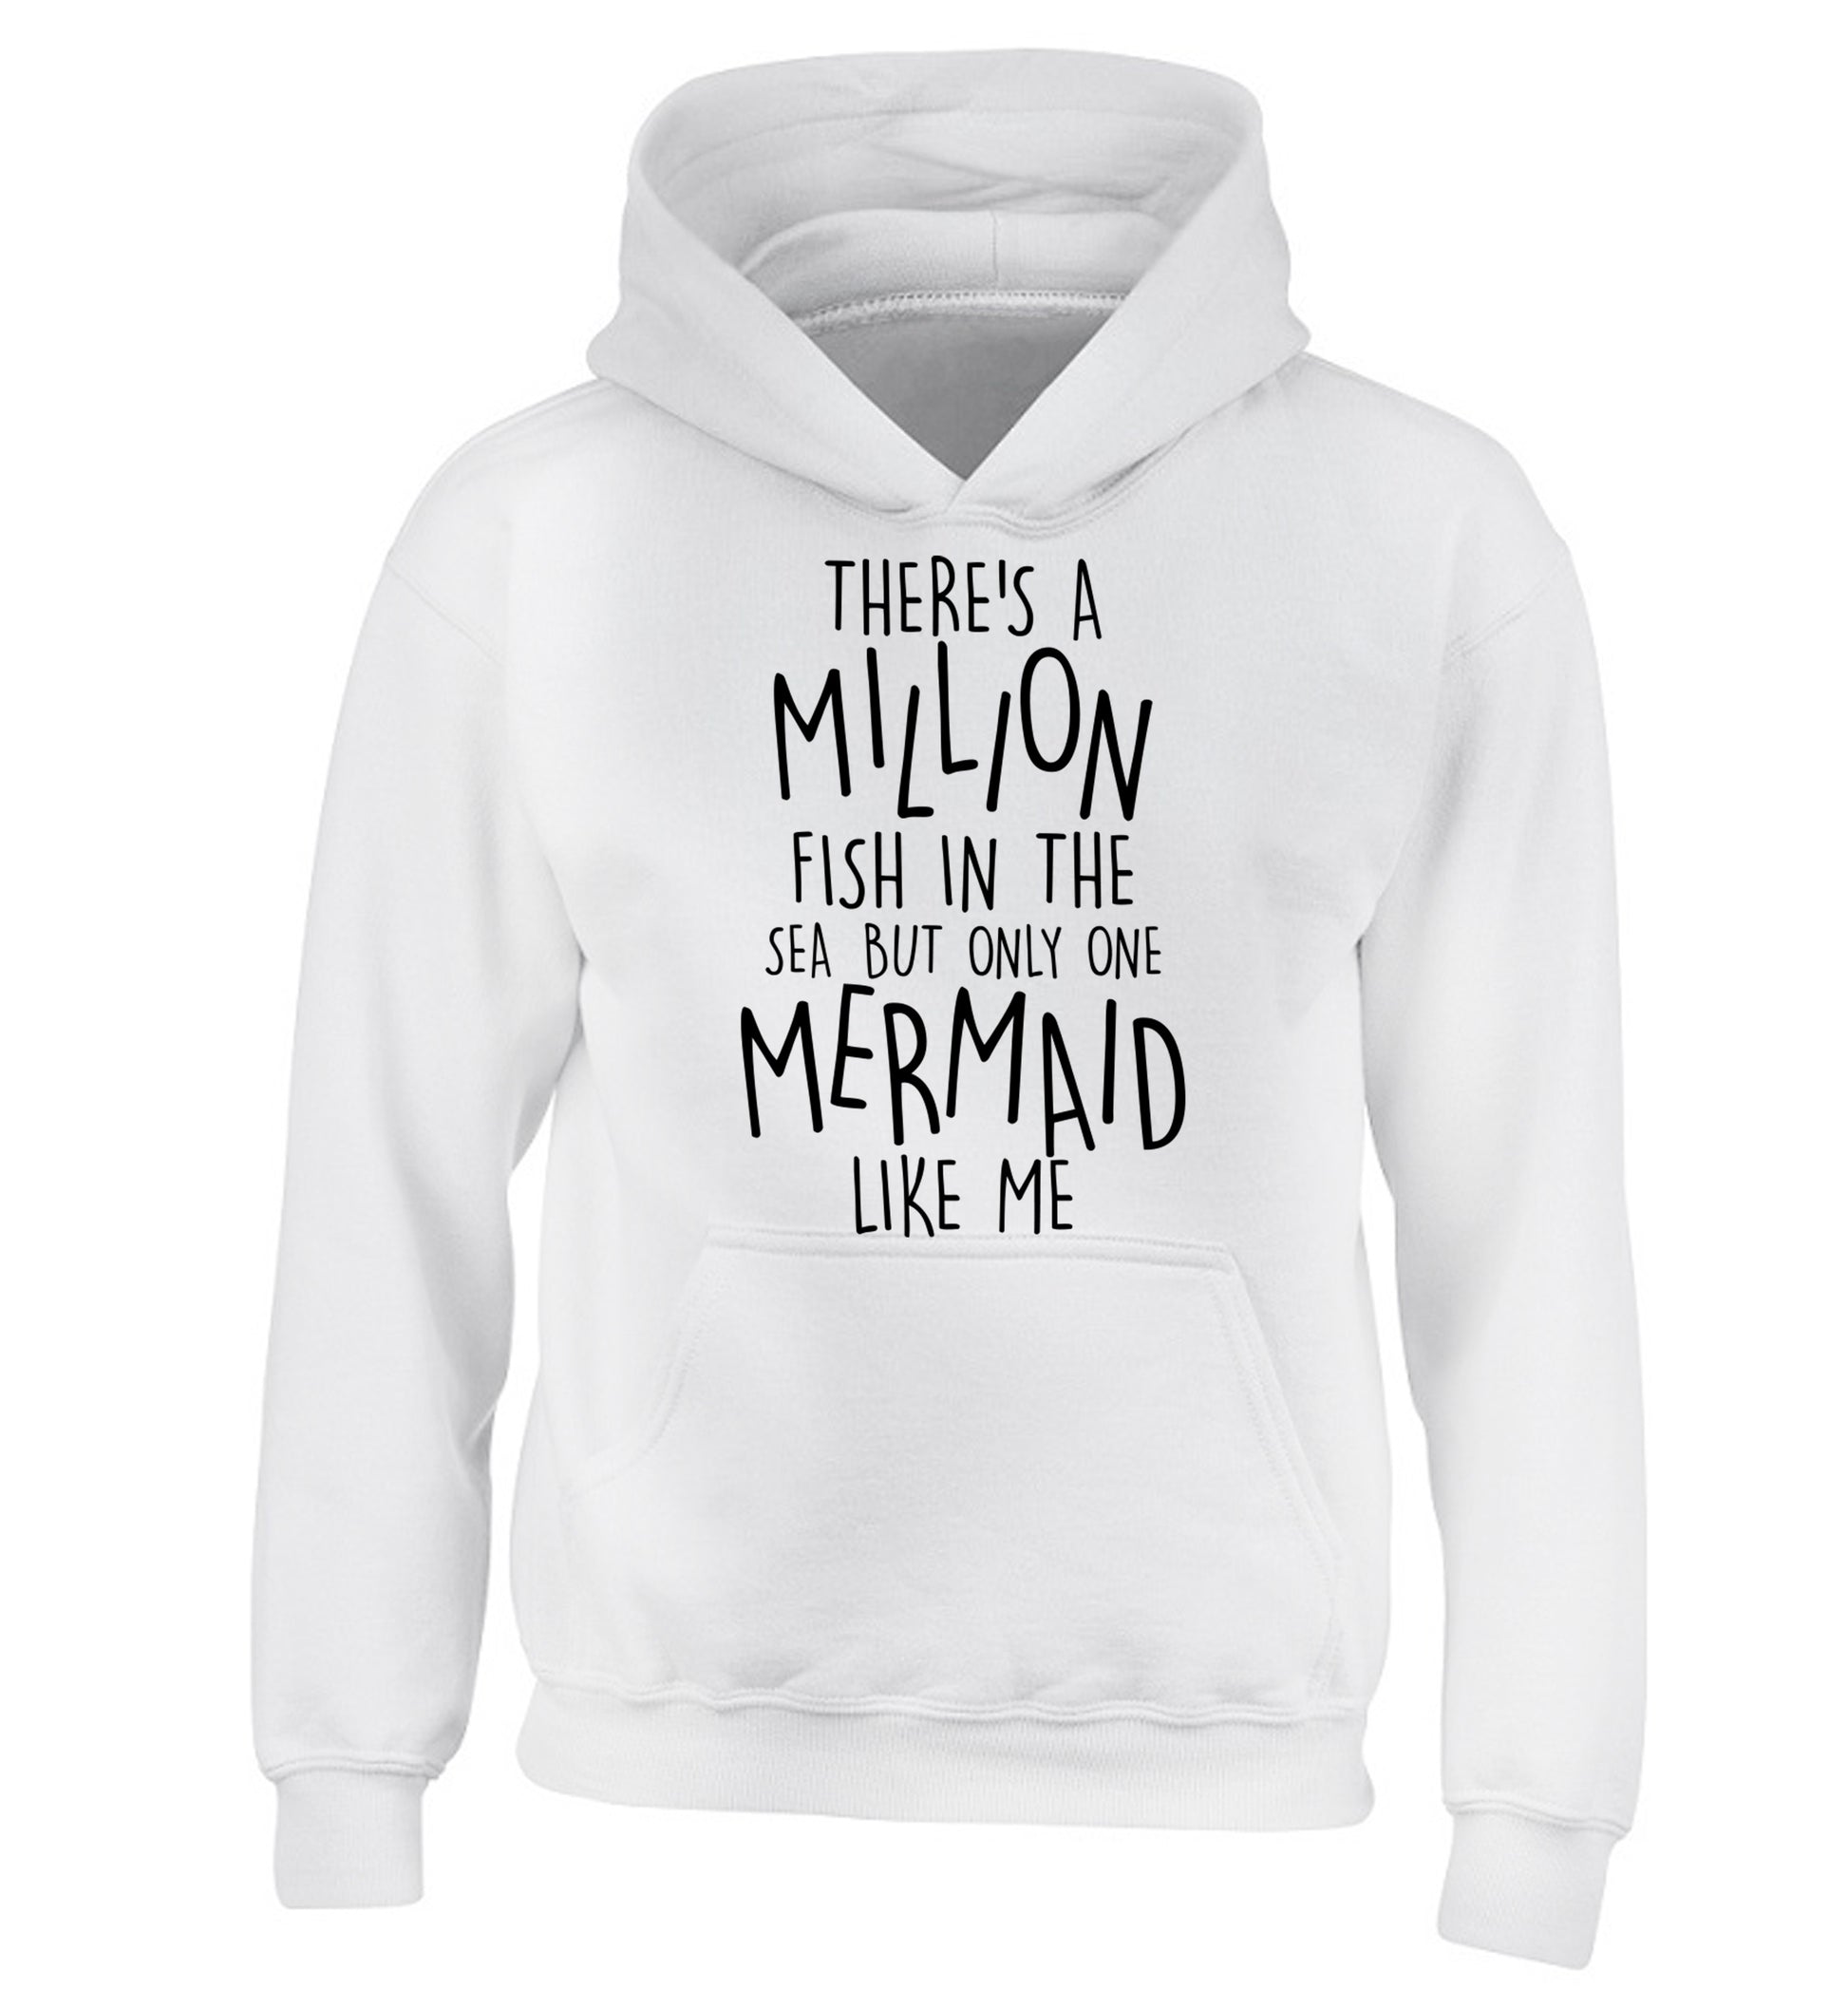 There's a million fish in the sea but only one mermaid like me children's white hoodie 12-13 Years